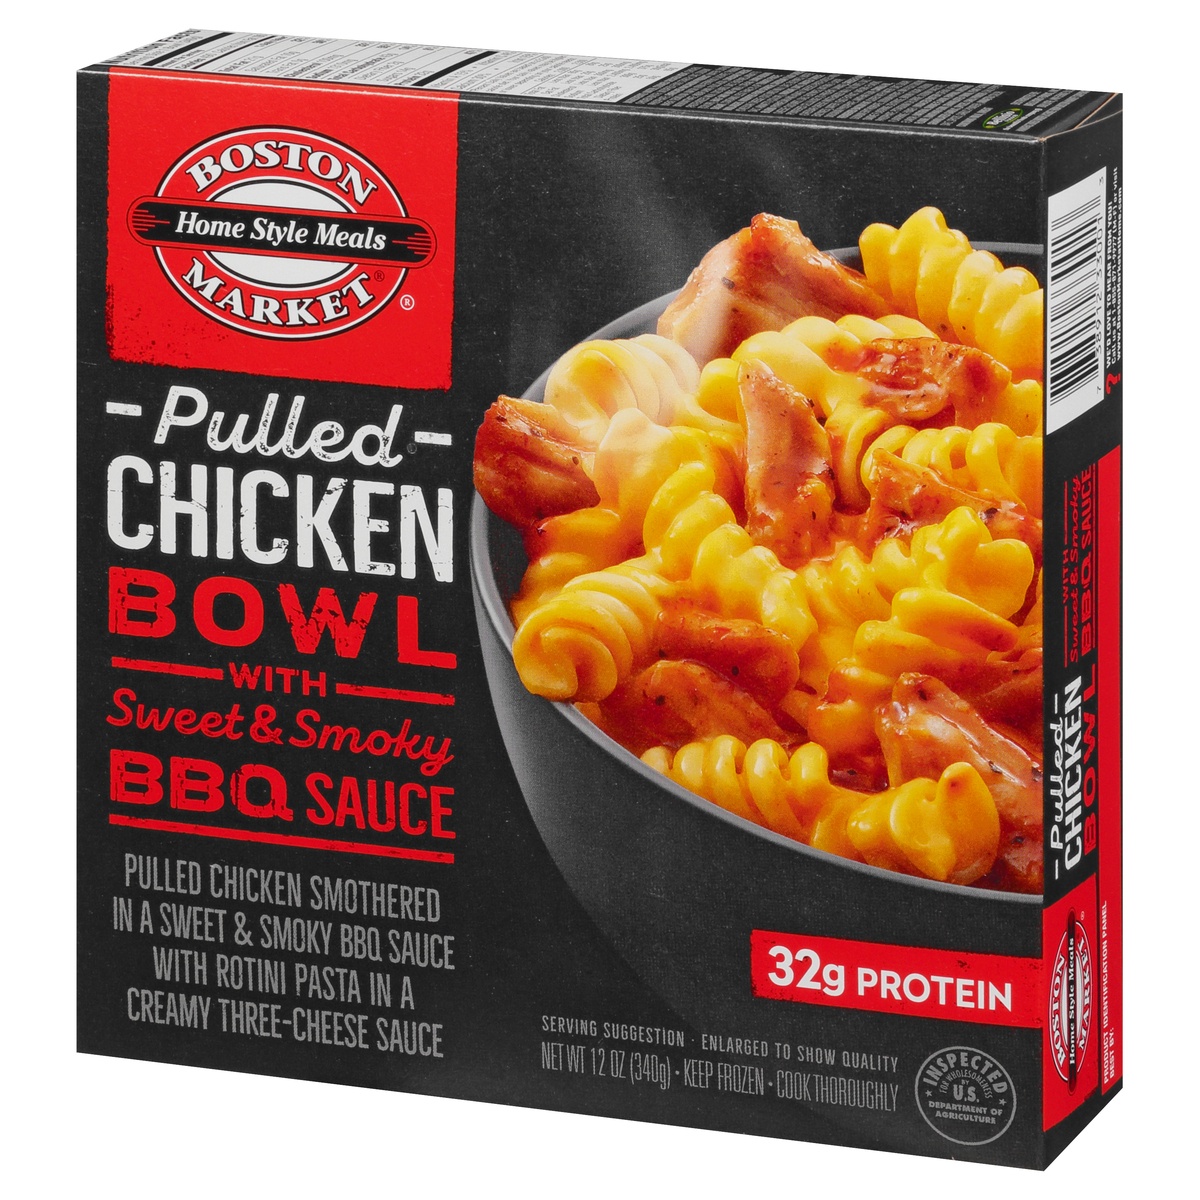 slide 3 of 11, Boston Market Home Style Meals Pulled Chicken Bowl with Sweet & Smoky BBQ Sauce, 12 oz